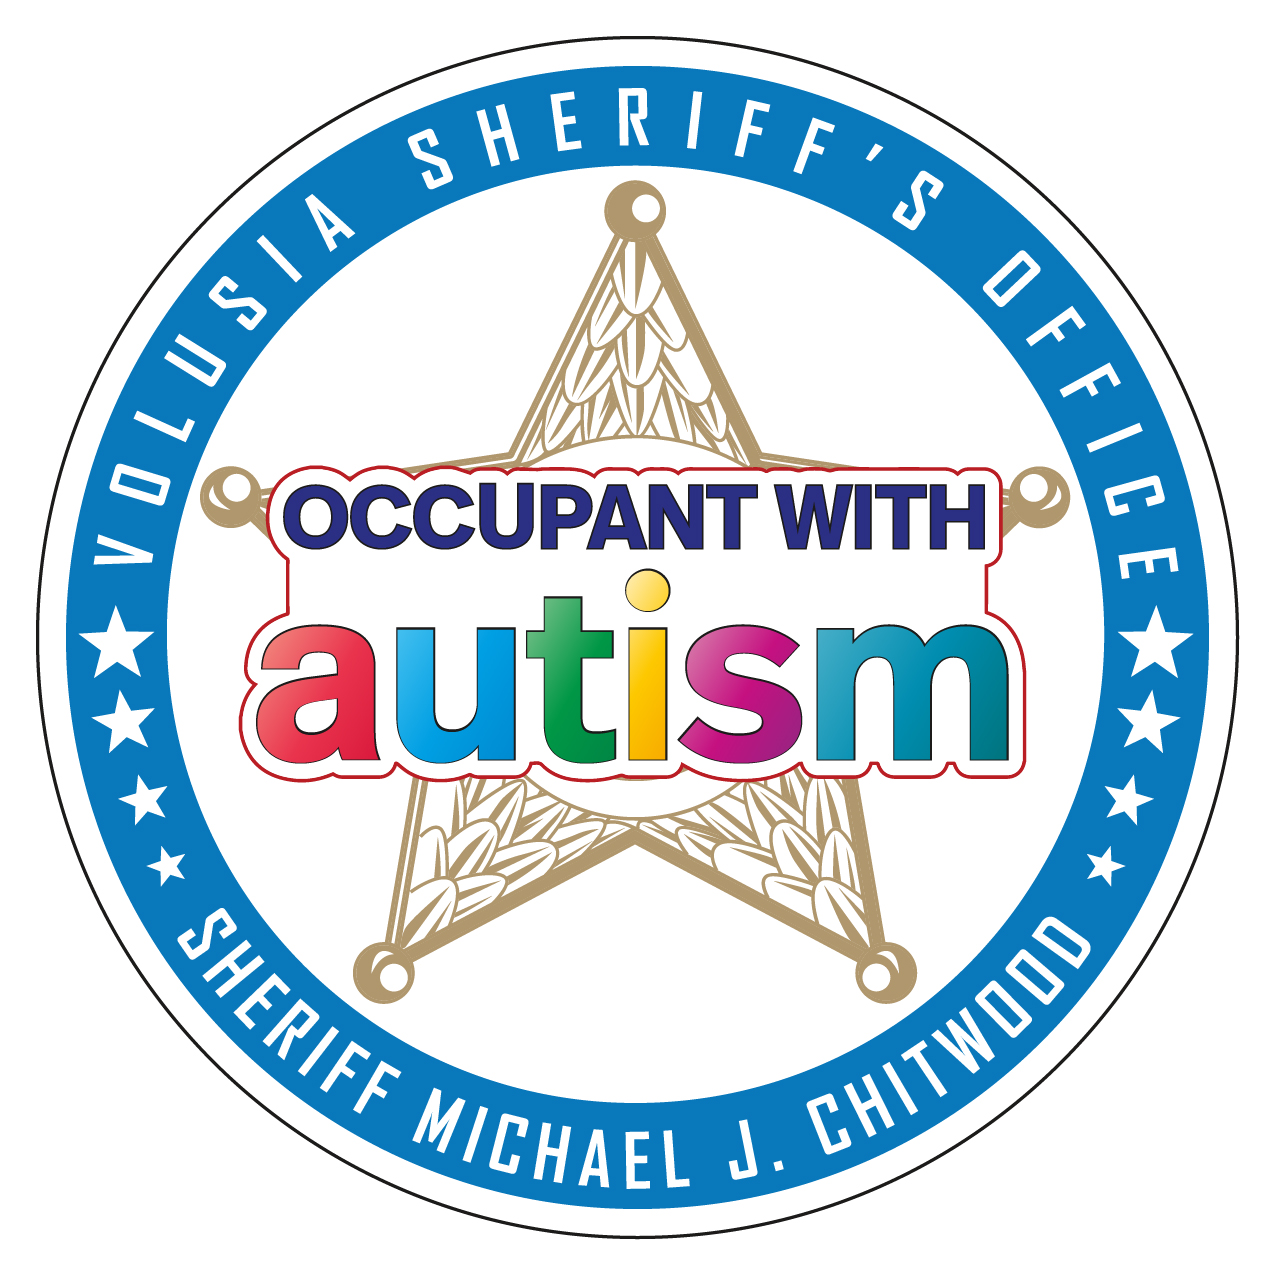 Occupant with autism Volusia Sheriff’s Office